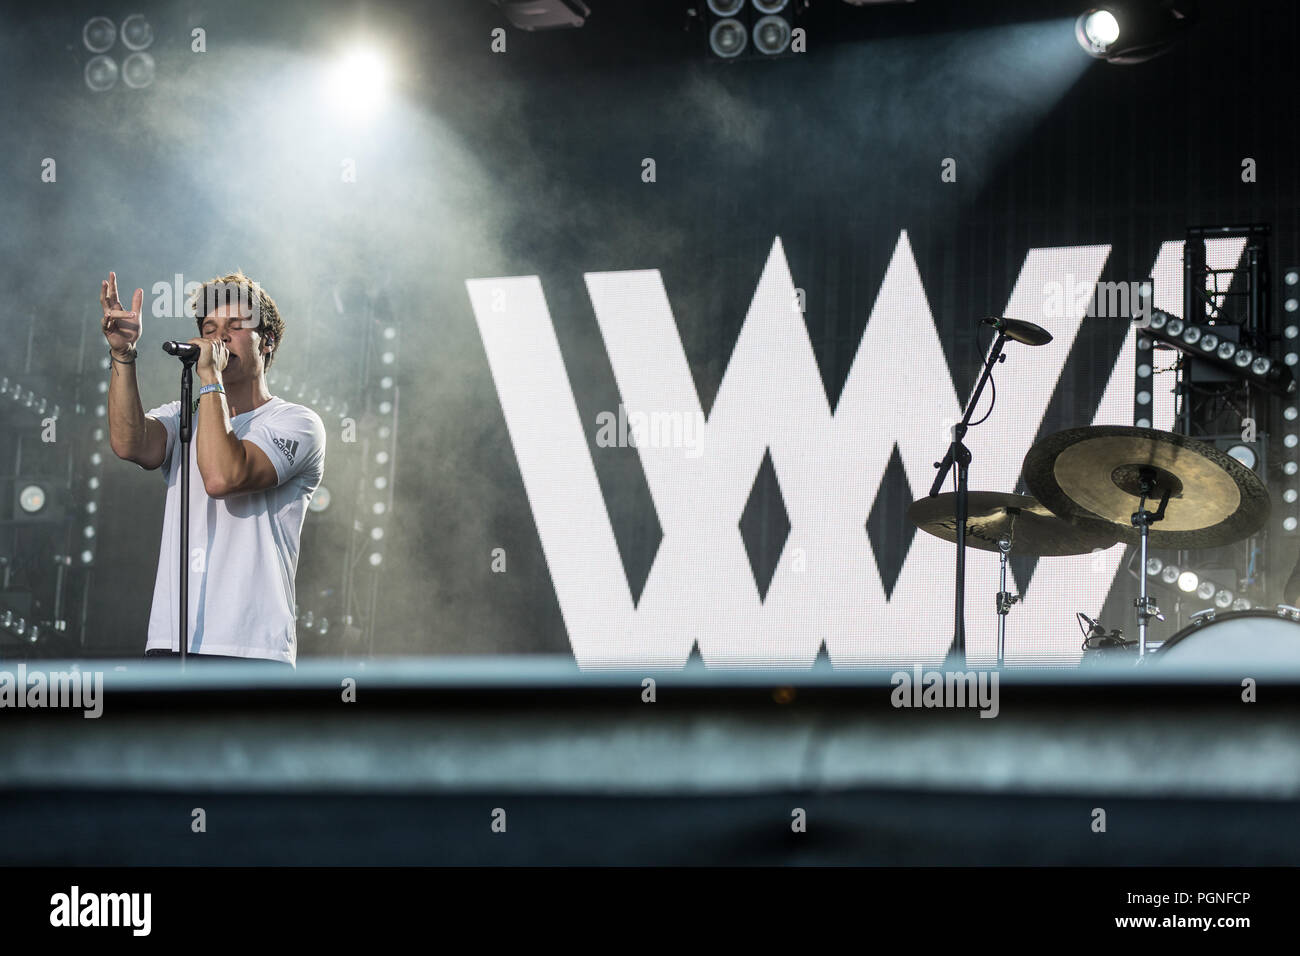 The German pop singer Wincent Weiss live at the 28th Heitere Open Air in Zofingen, Aargau, Switzerland Stock Photo